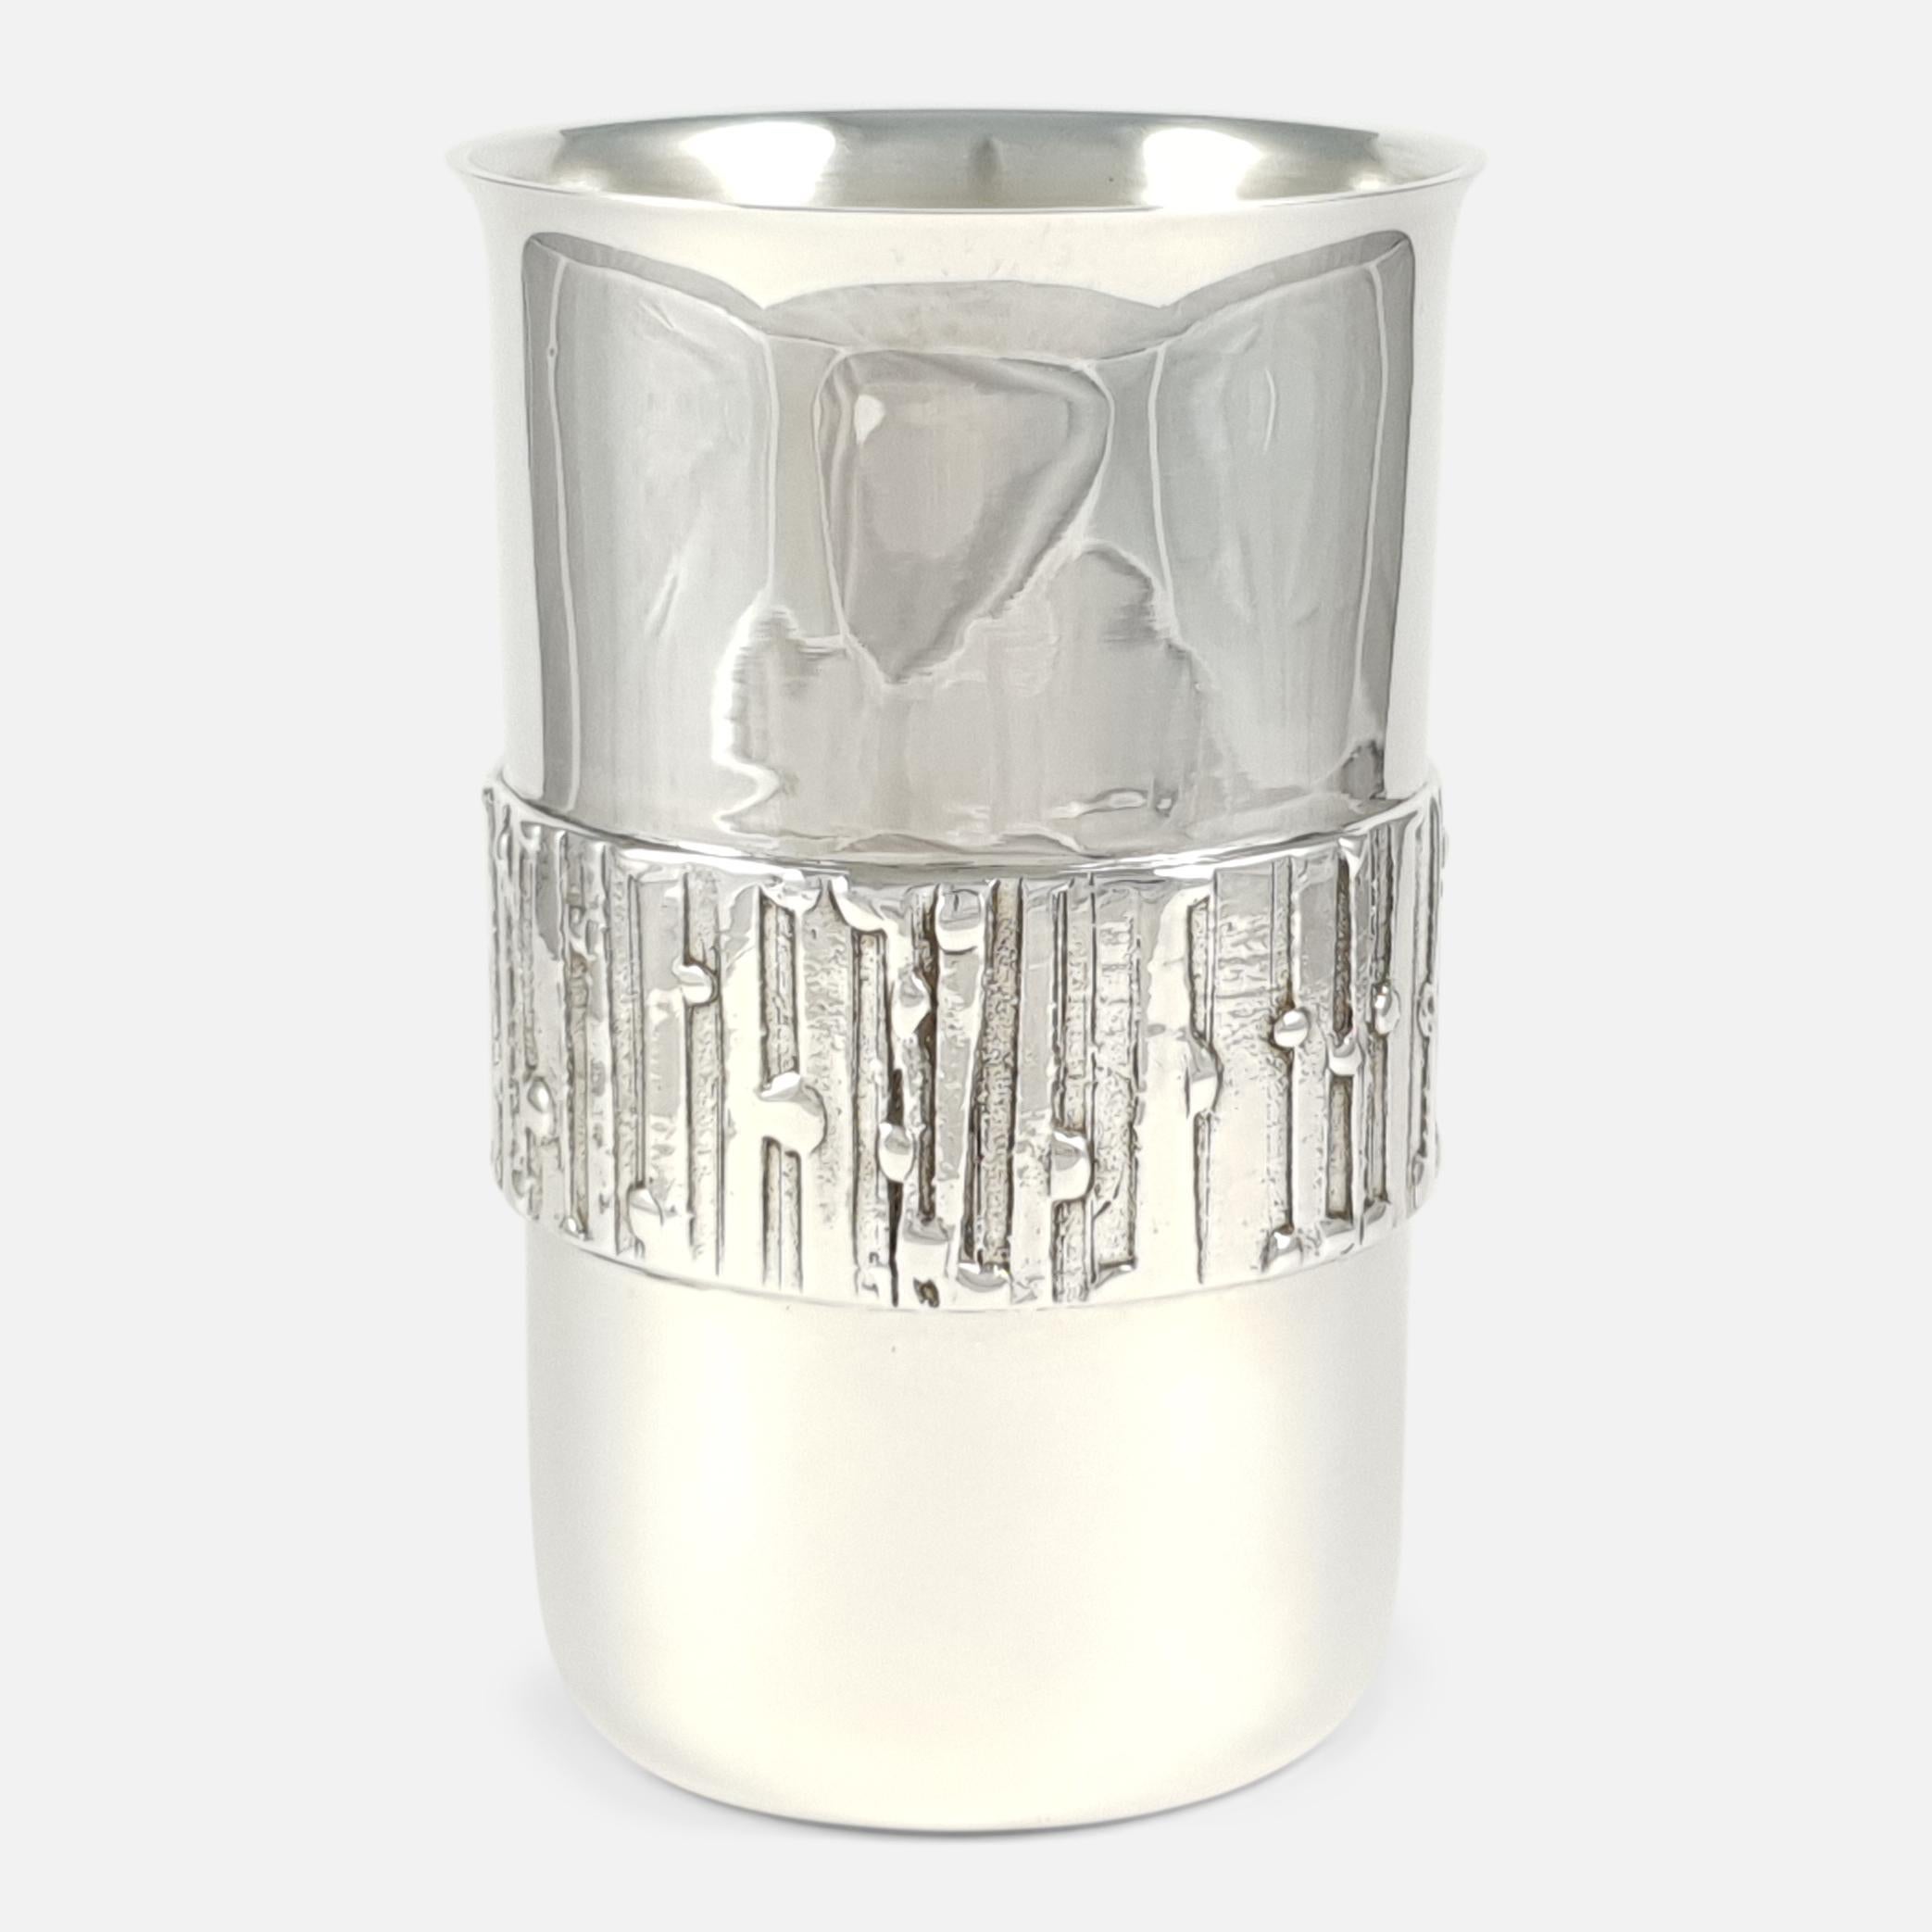 An Elizabeth II sterling silver beaker made by the silversmith Brian Asquith, 1975.

Assay: - .925 sterling silver.

Date: - 1975.

Period: - Late 20th century.

Maker: - Brian Asquith.

Measurement: - The beaker measures 10.8cm height x 6.8cm